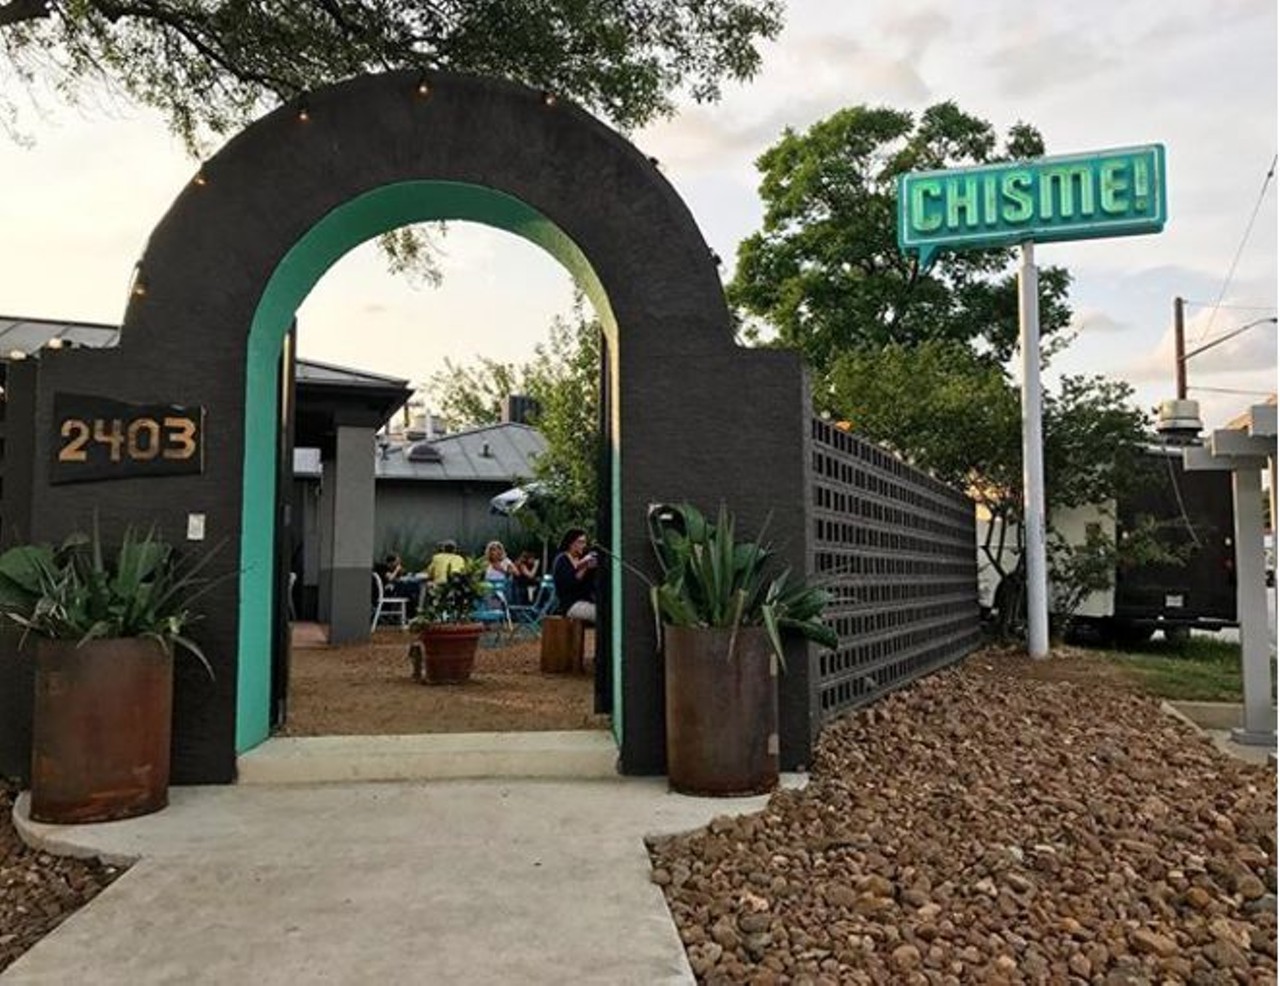 Chisme
2403 N. St. Mary's, (210) 530-4236
Great drinks, delicious food, chill vibes. What more could you ask for? Chisme and it&#146;s beautiful outsides pace is open from 4 to 11. 
Photo via Instagram,  shimmyshake_